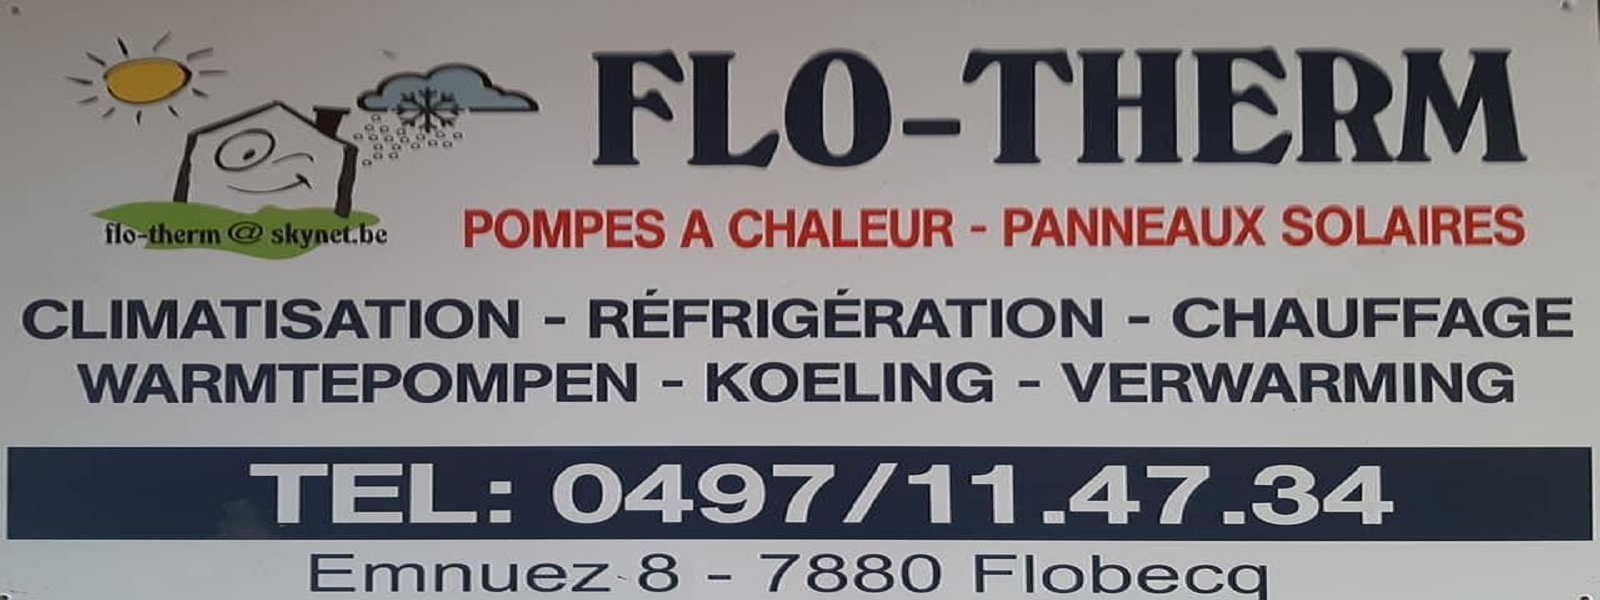 Flo-therm